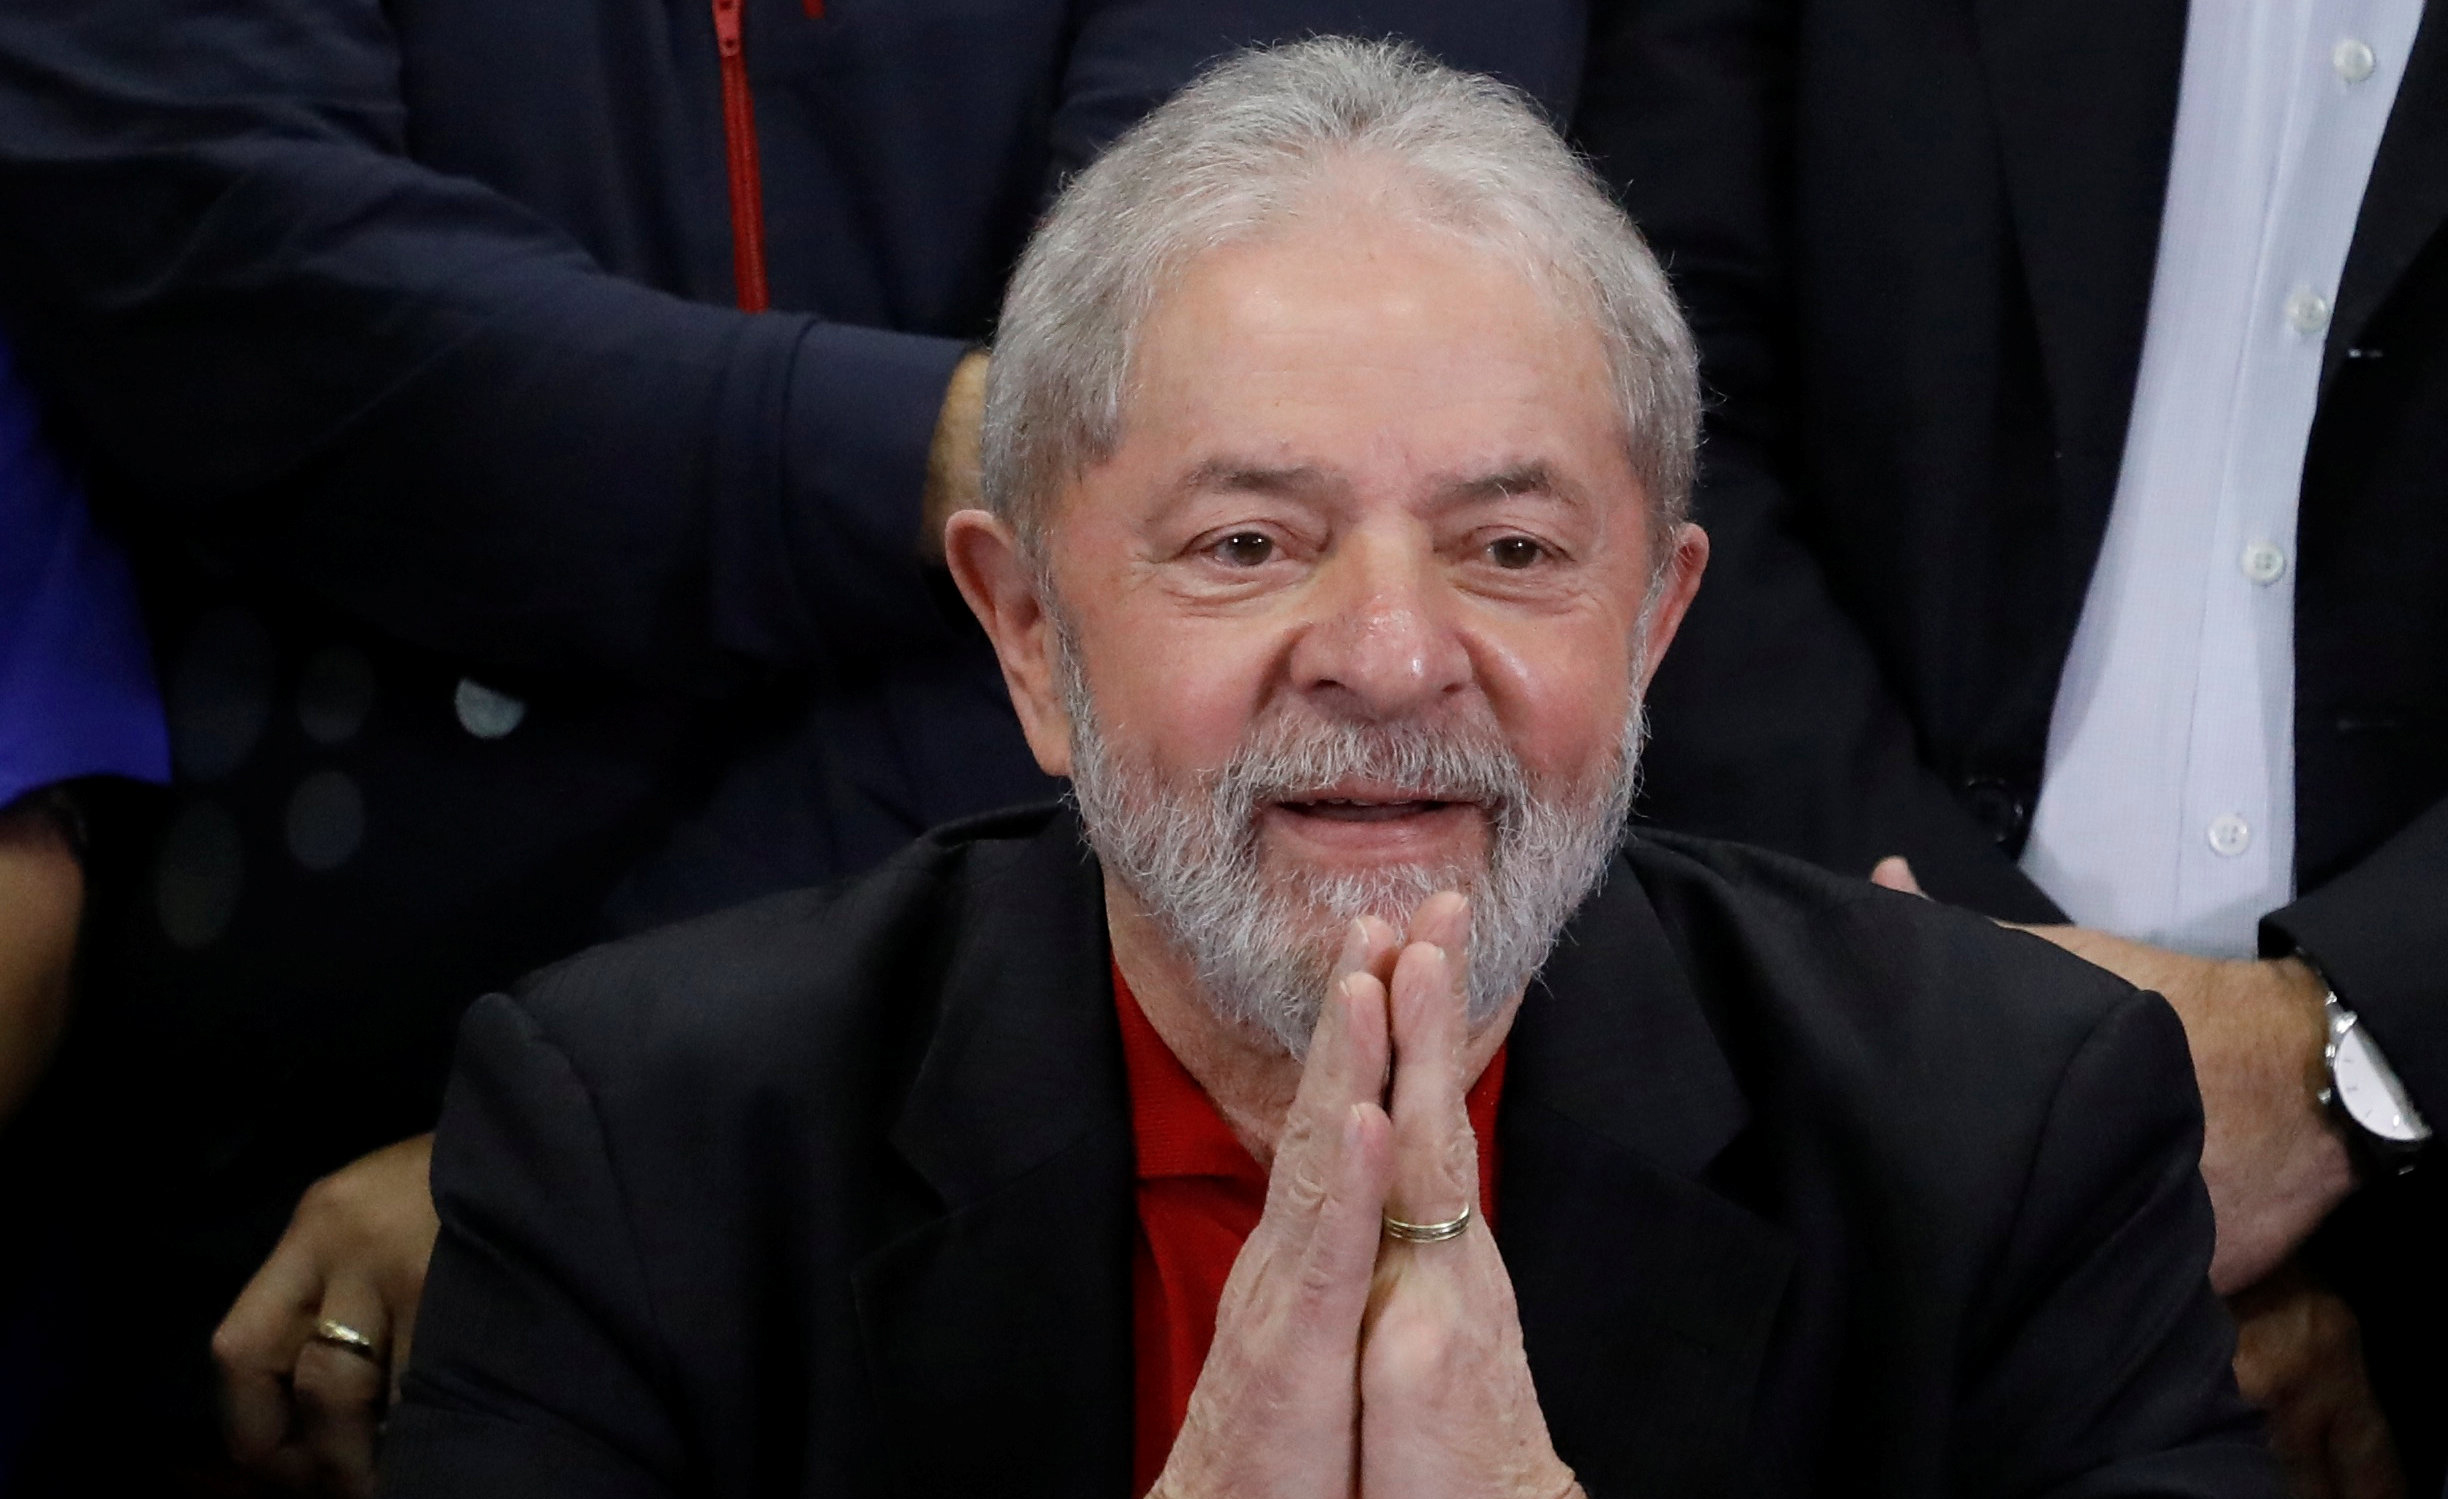 Former Brazilian President Luiz Inacio Lula da Silva gestures during a news conference after being convicted on corruption charges, in Sao Paulo